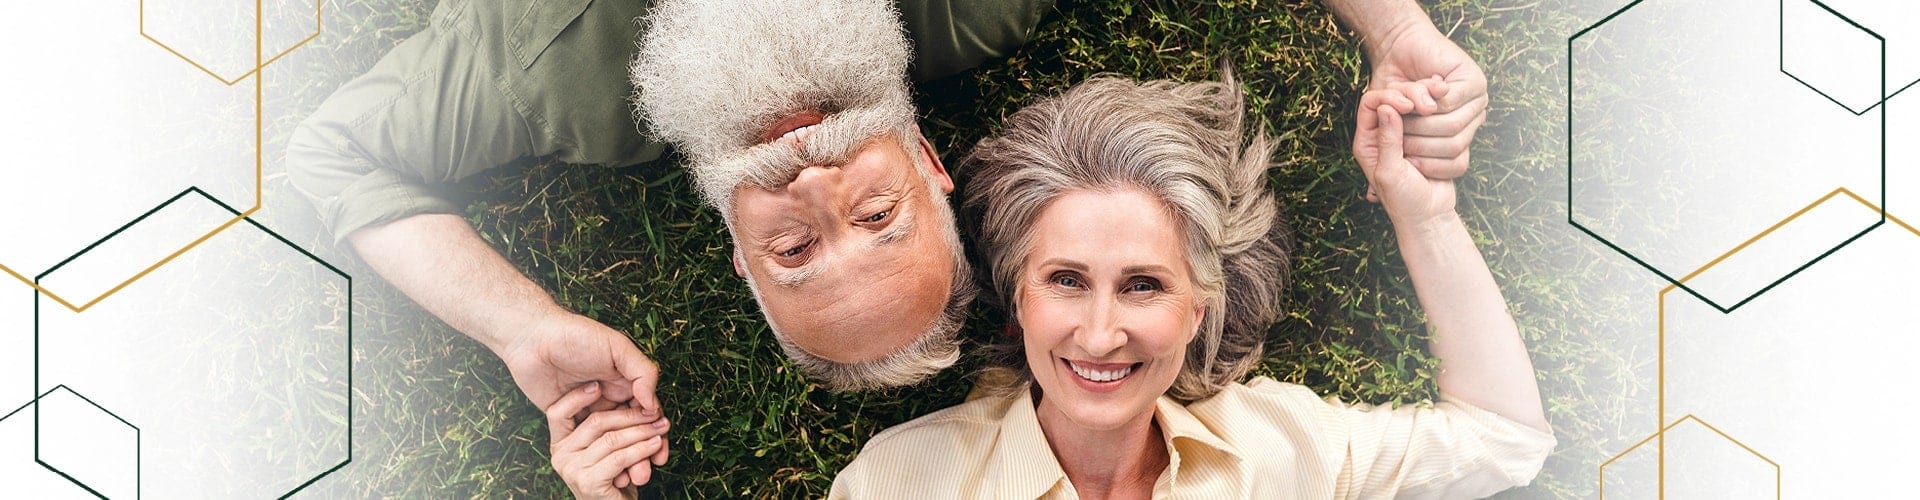 mature man and woman smiling